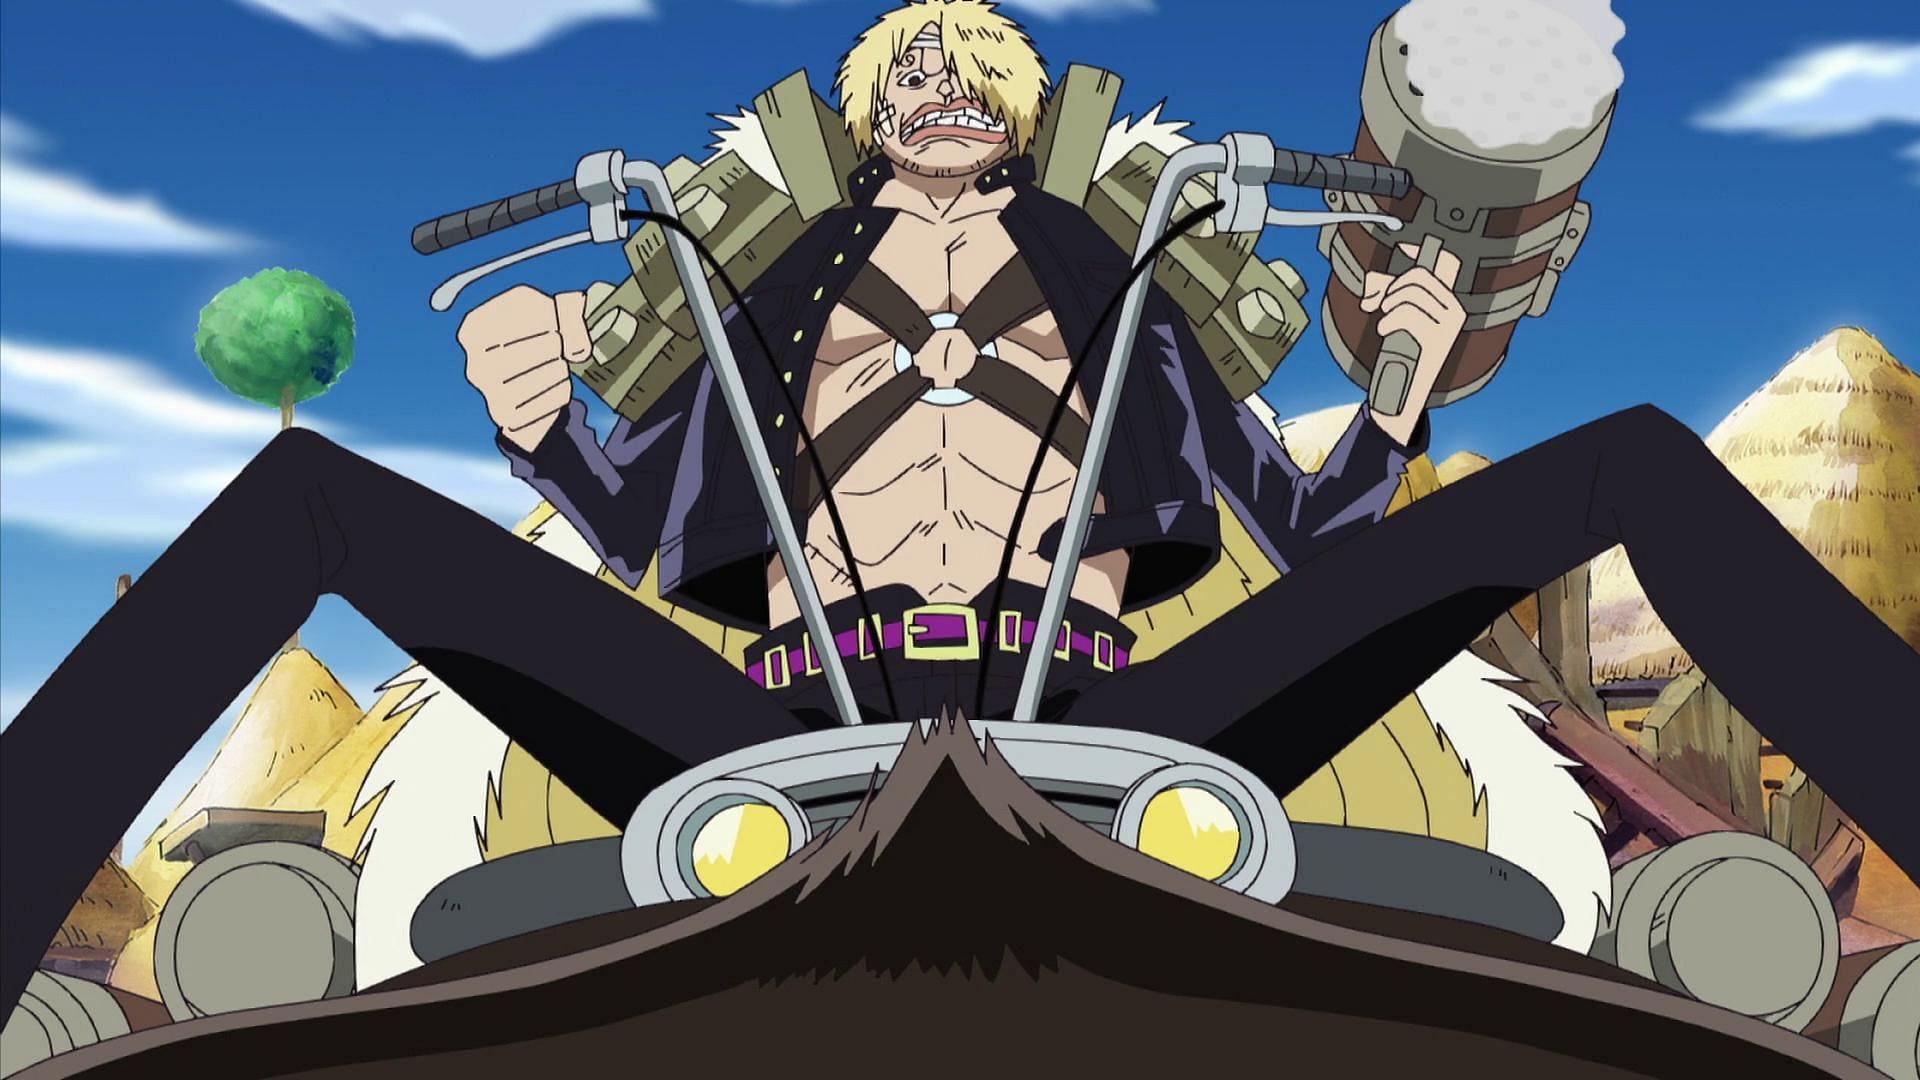 Duval as seen in the One Piece anime (Image via Toei Animation)